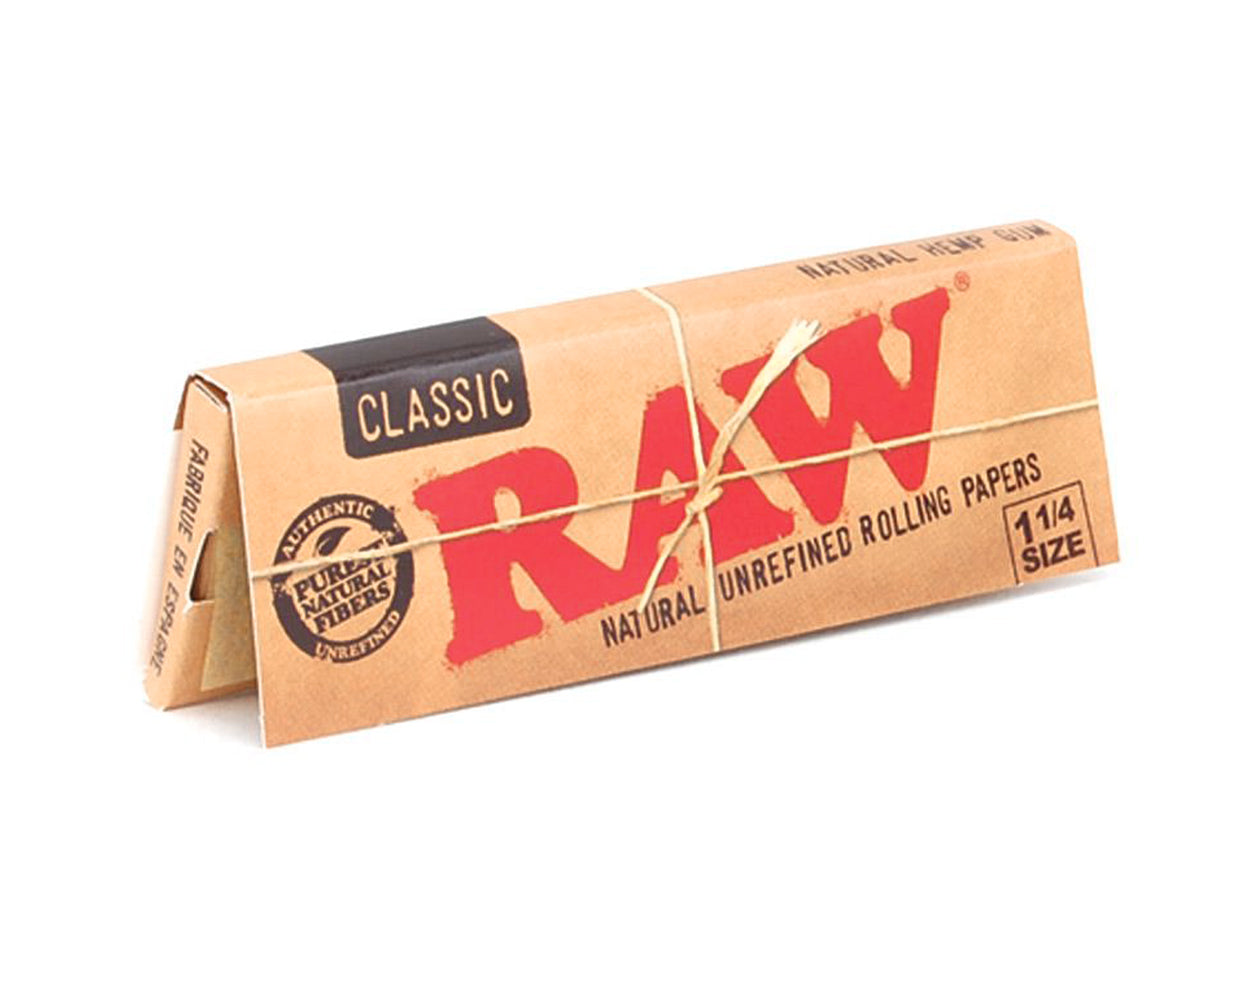 RAW | 'Retail Display' 1 1/4 Size Rolling Papers | 83mm - Classic - 24 Count - 3